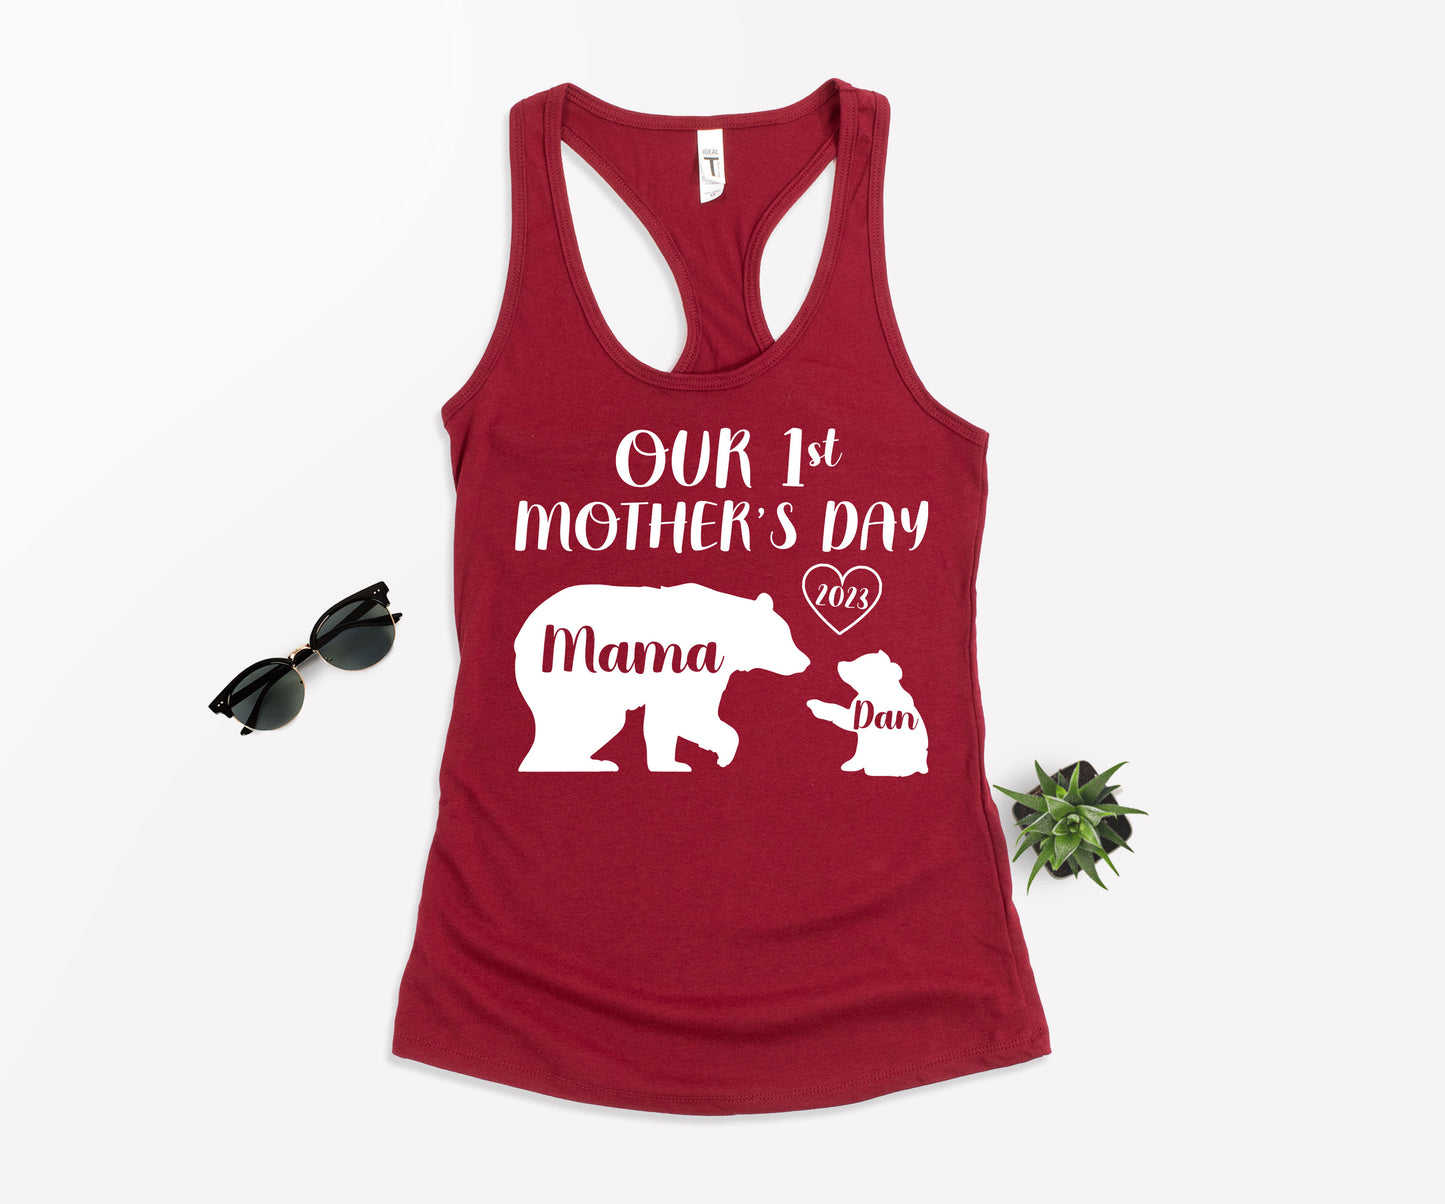 Our 1st Mother's Day Shirt, Mama Bear Shirt with Kids Name, Custom Mom Shirt